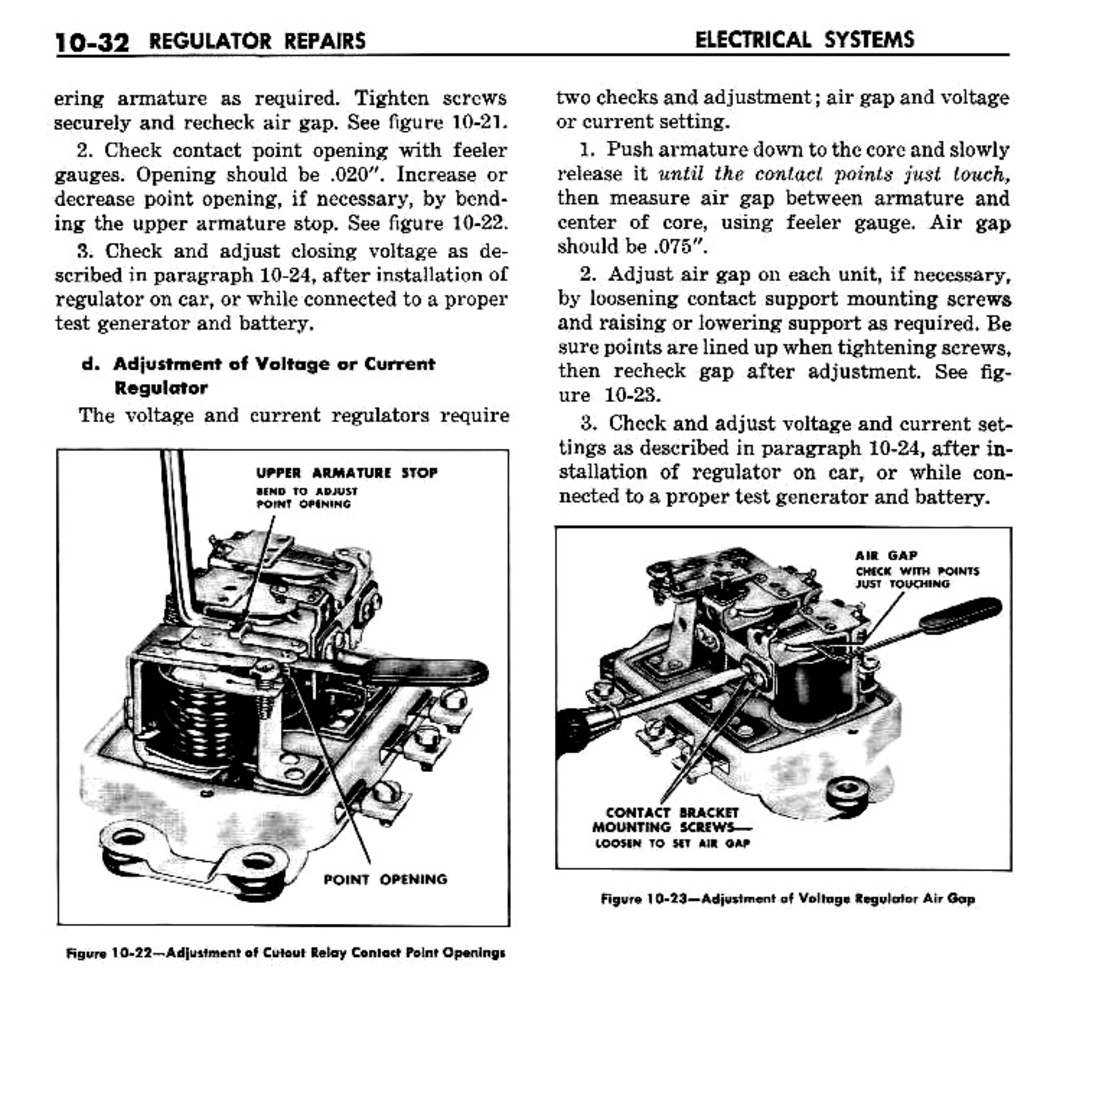 n_11 1957 Buick Shop Manual - Electrical Systems-032-032.jpg